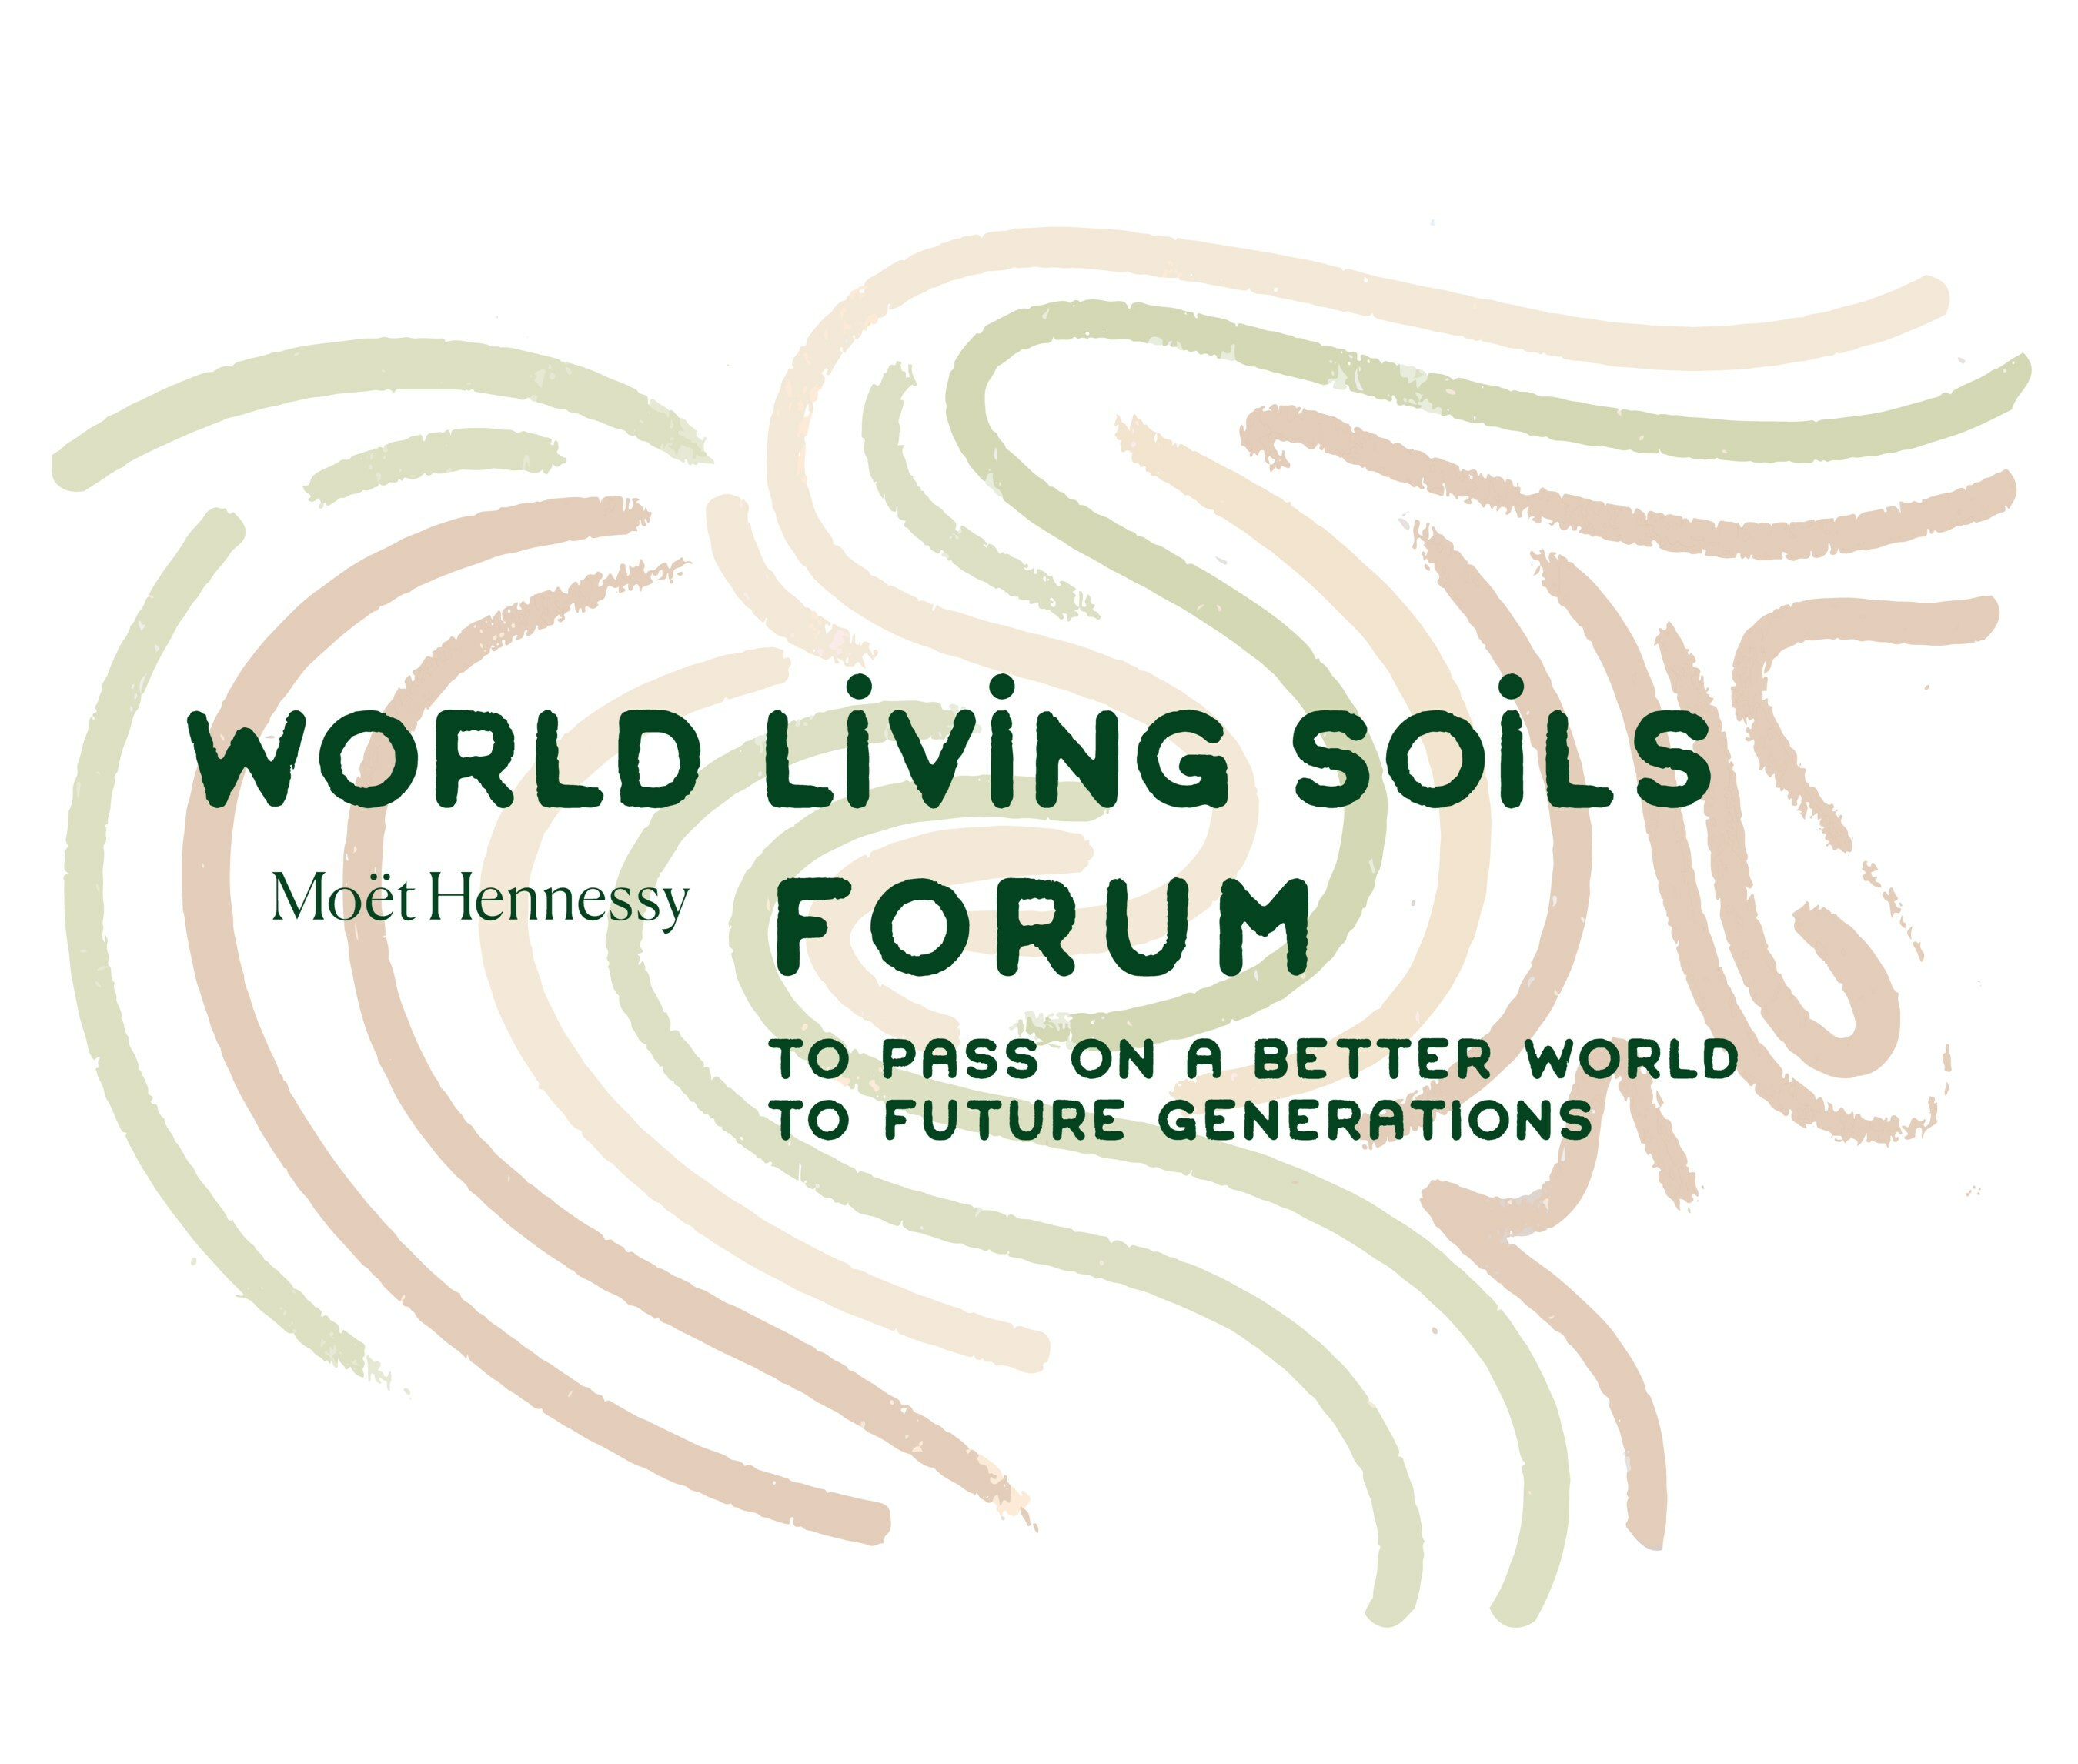 MOËT HENNESSY AND CHANGENOW ANNOUNCE THEIR PARTNERSHIP WITHIN THE CONTEXT  OF THE WORLD LIVING SOILS FORUM - PR Newswire APAC